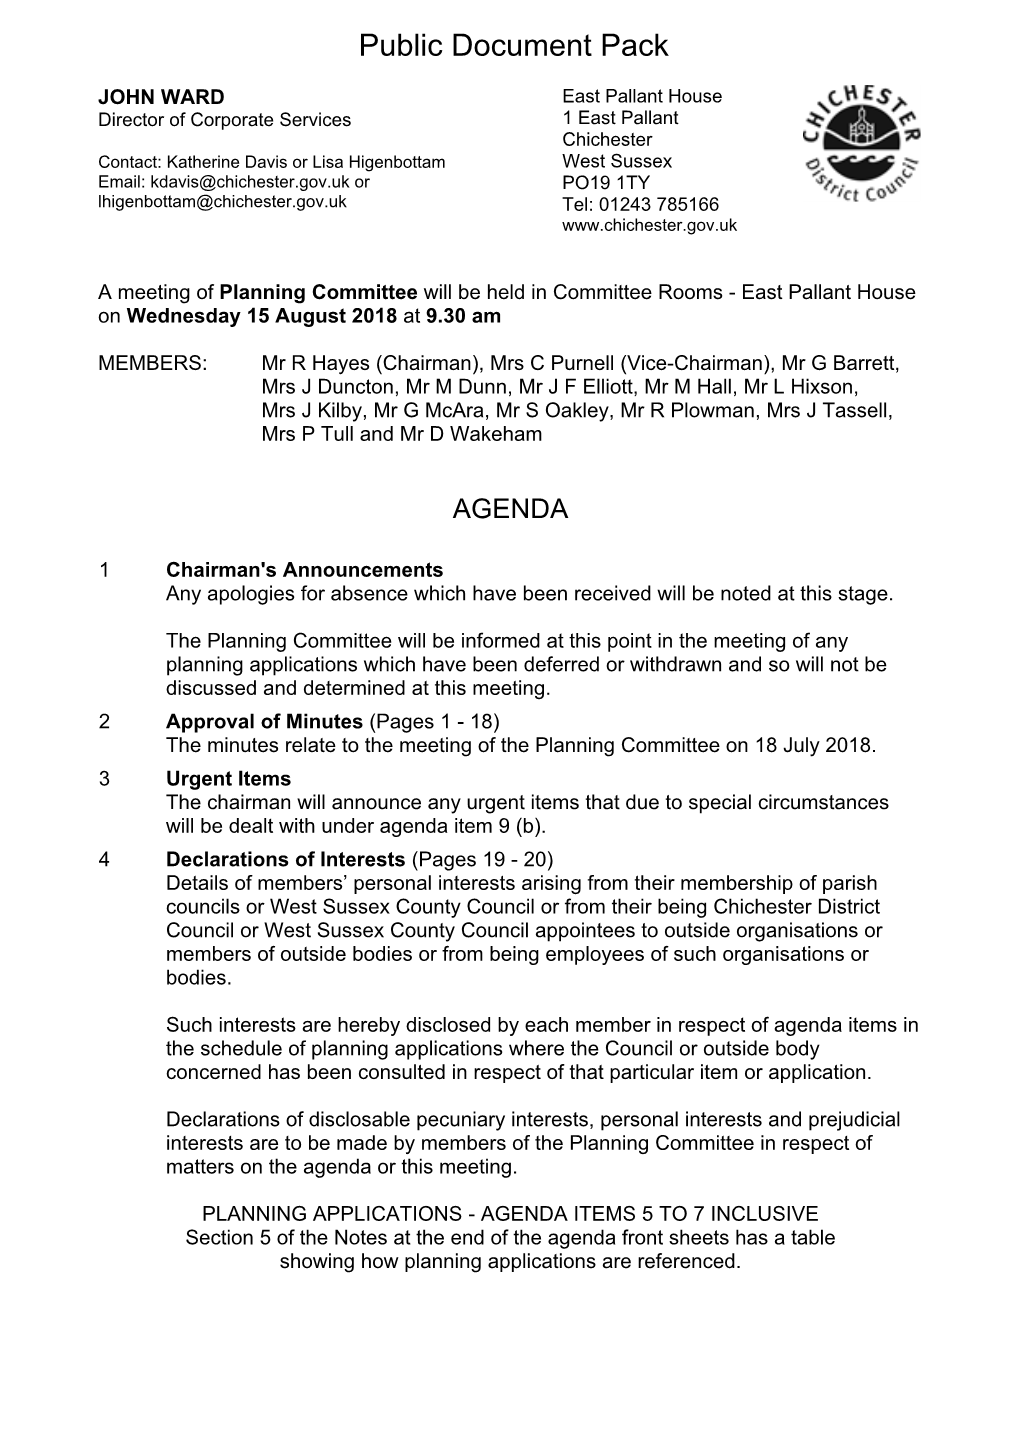 (Public Pack)Agenda Document for Planning Committee, 15/08/2018